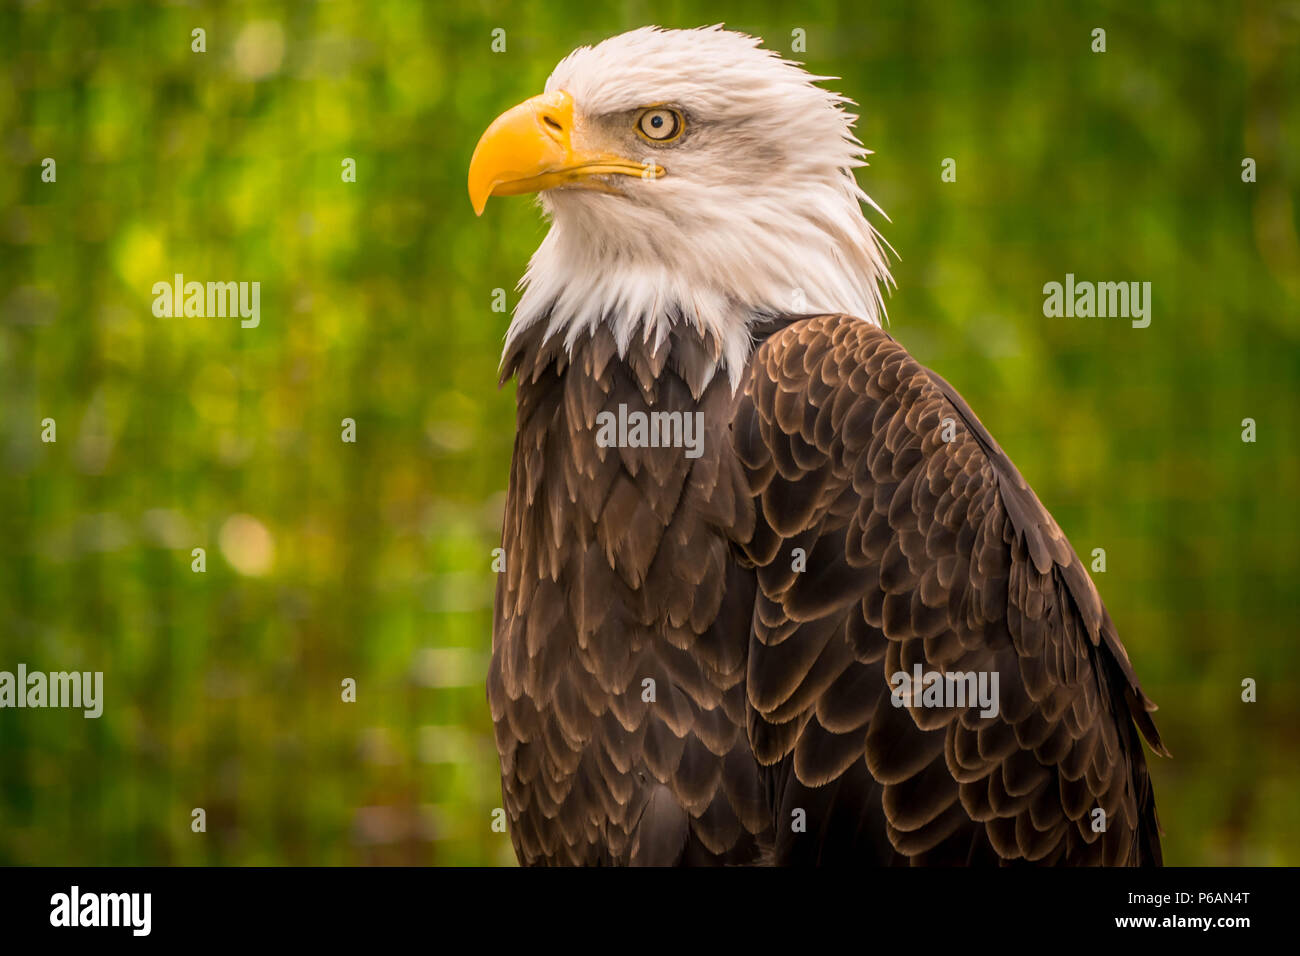 Bald headed eagle with blurred green background Stock Photo